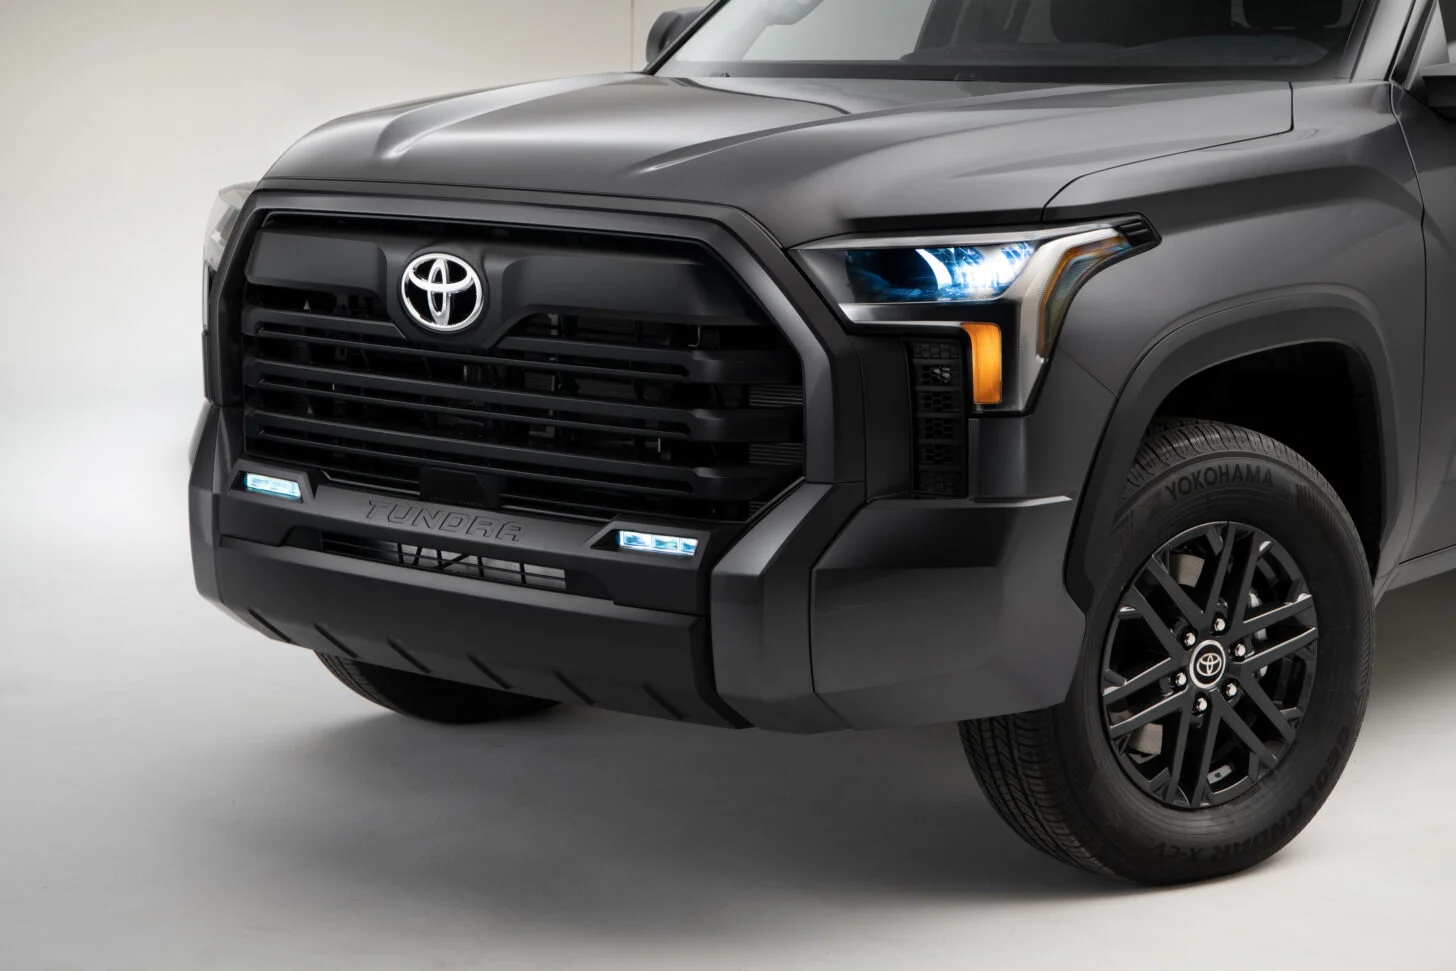 Toyota slightly updated the Tundra and Tacoma pickups in the US